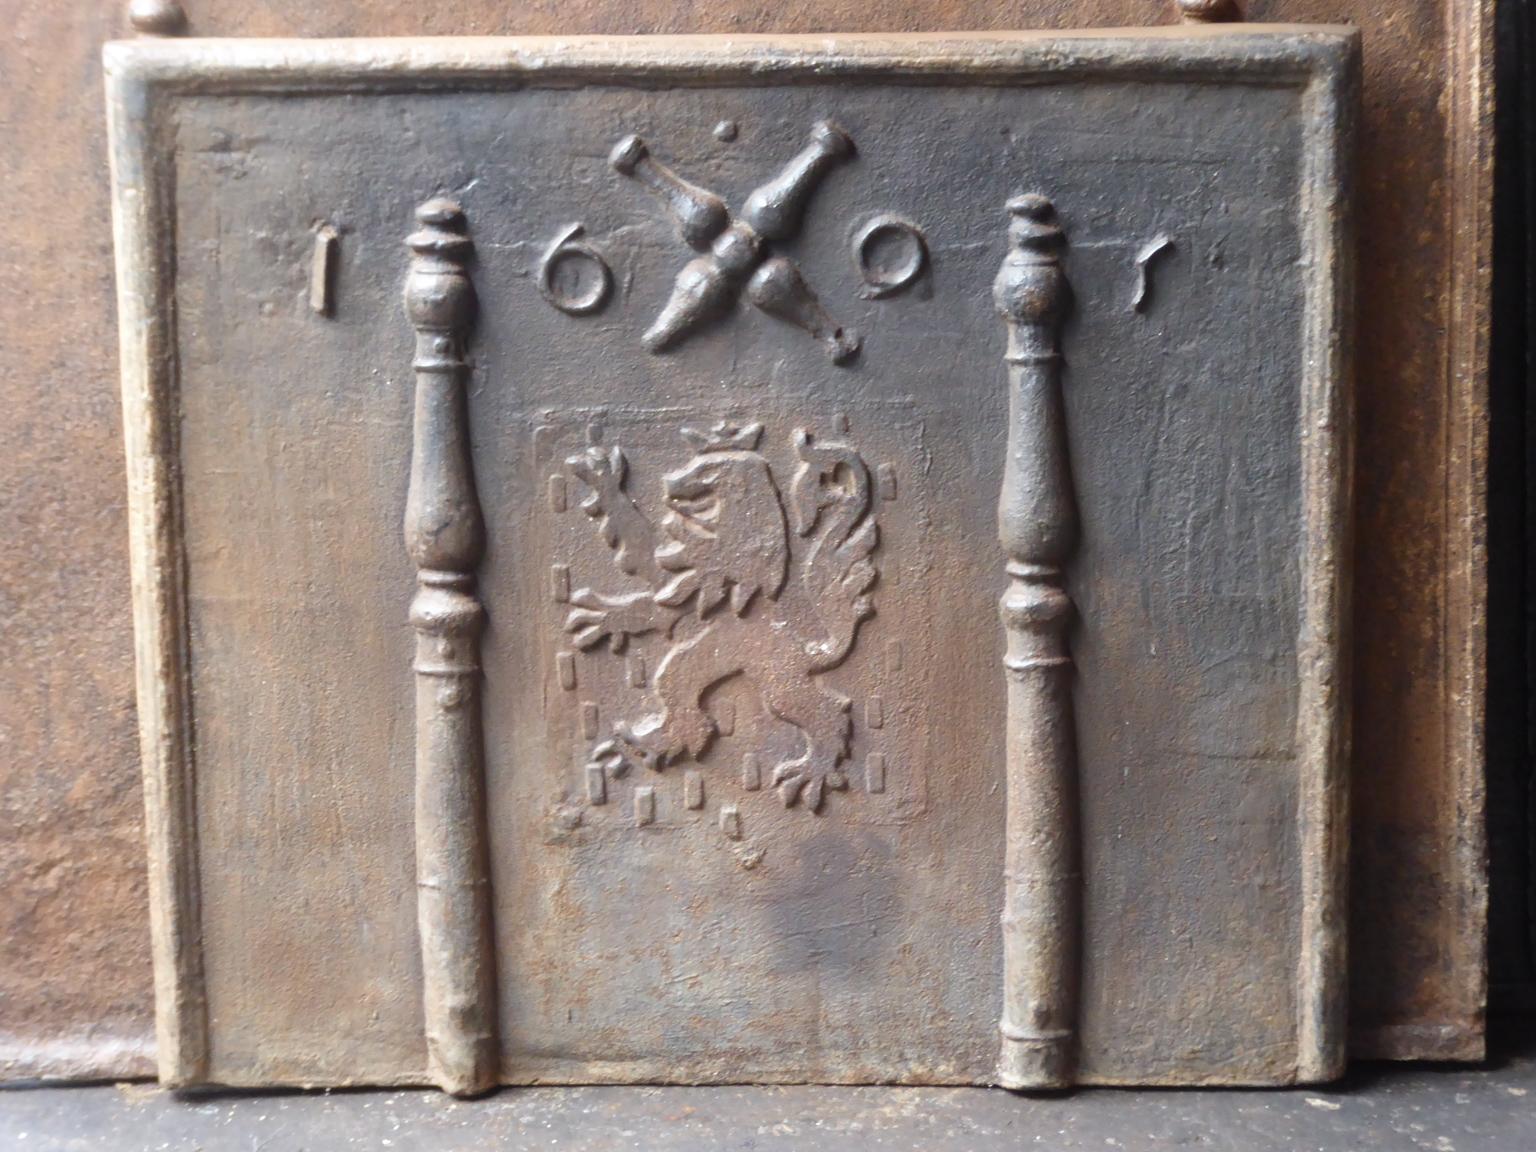 Beautiful 20th century French fireback with a Saint Andrew's cross and two pillars of Hercules. Saint Andrew is said to have been martyred on a cross in this shape. The cross is since then a sign for humility and sacrifice. The pillars of Hercules